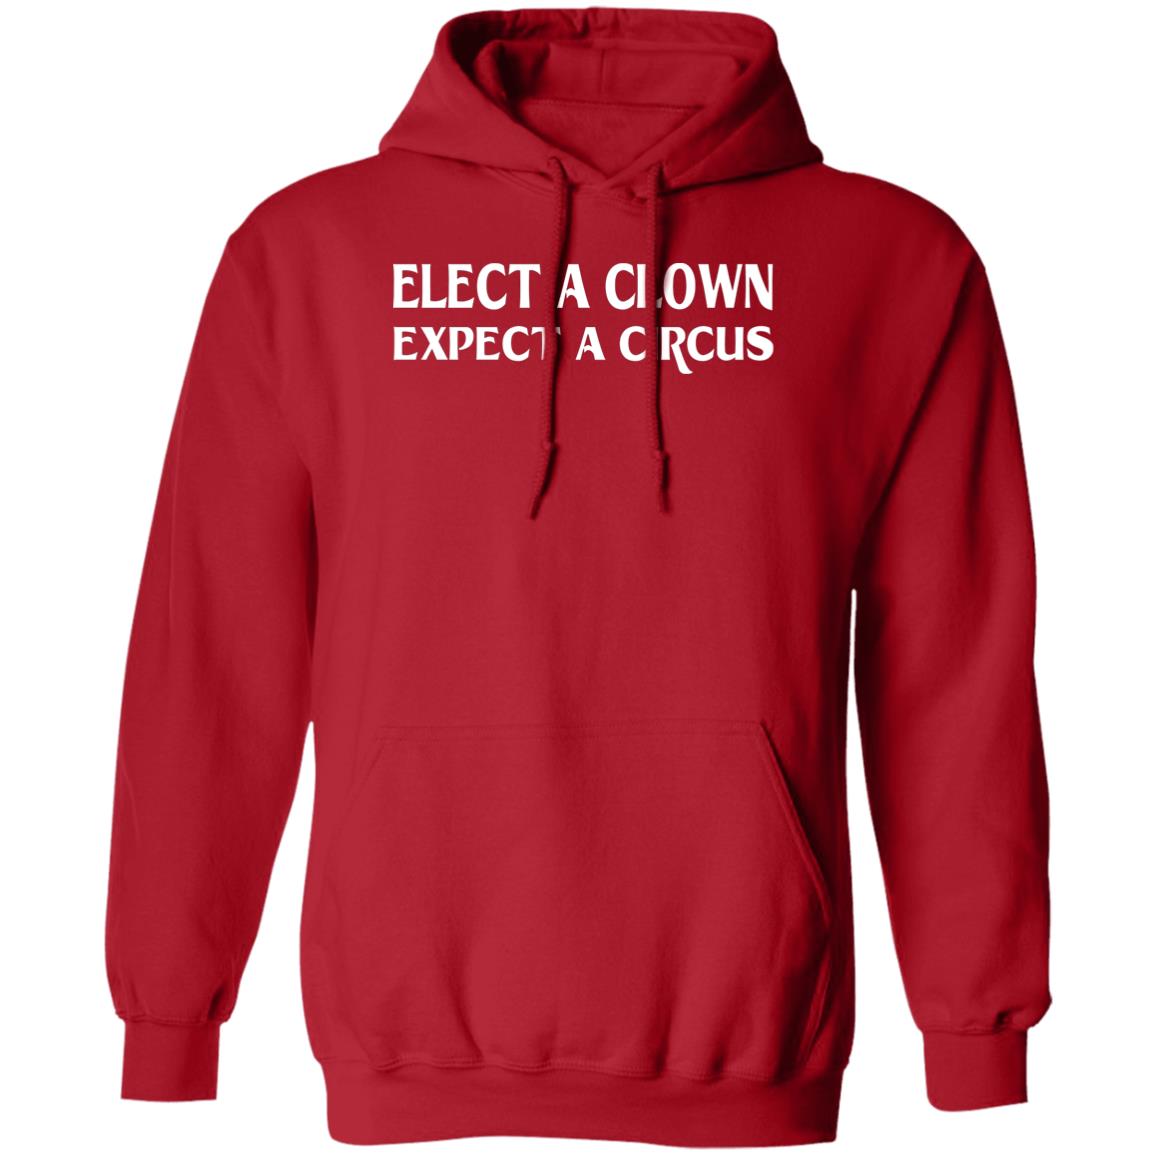 Elect A Clown Expect A Circus Hoodie